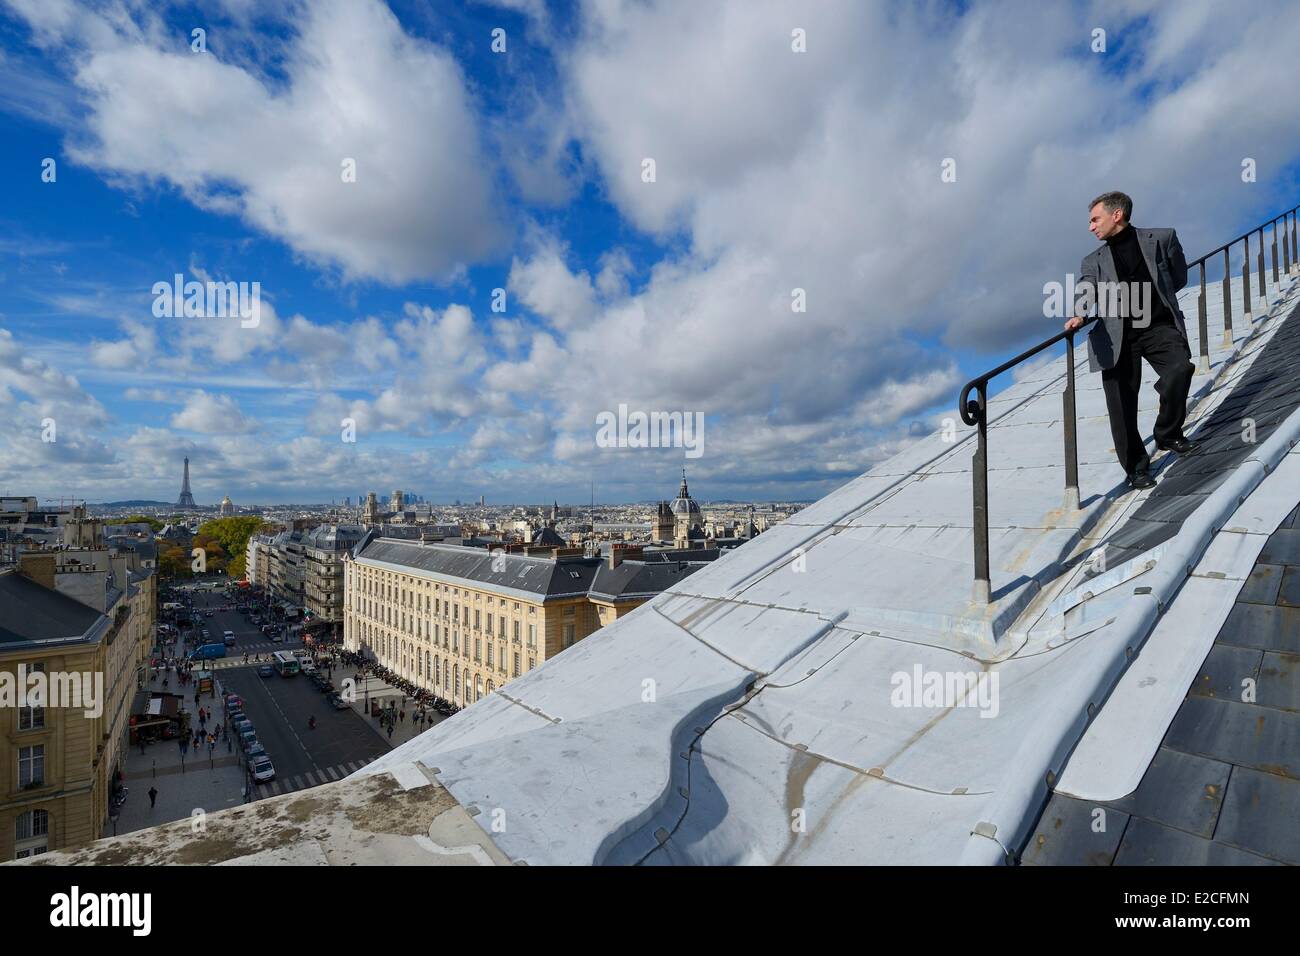 France, Paris, Pascal Monnet, administrator of Pantheon, on Pantheon roof, Soufflot Street and Eiffel Tower in background Stock Photo